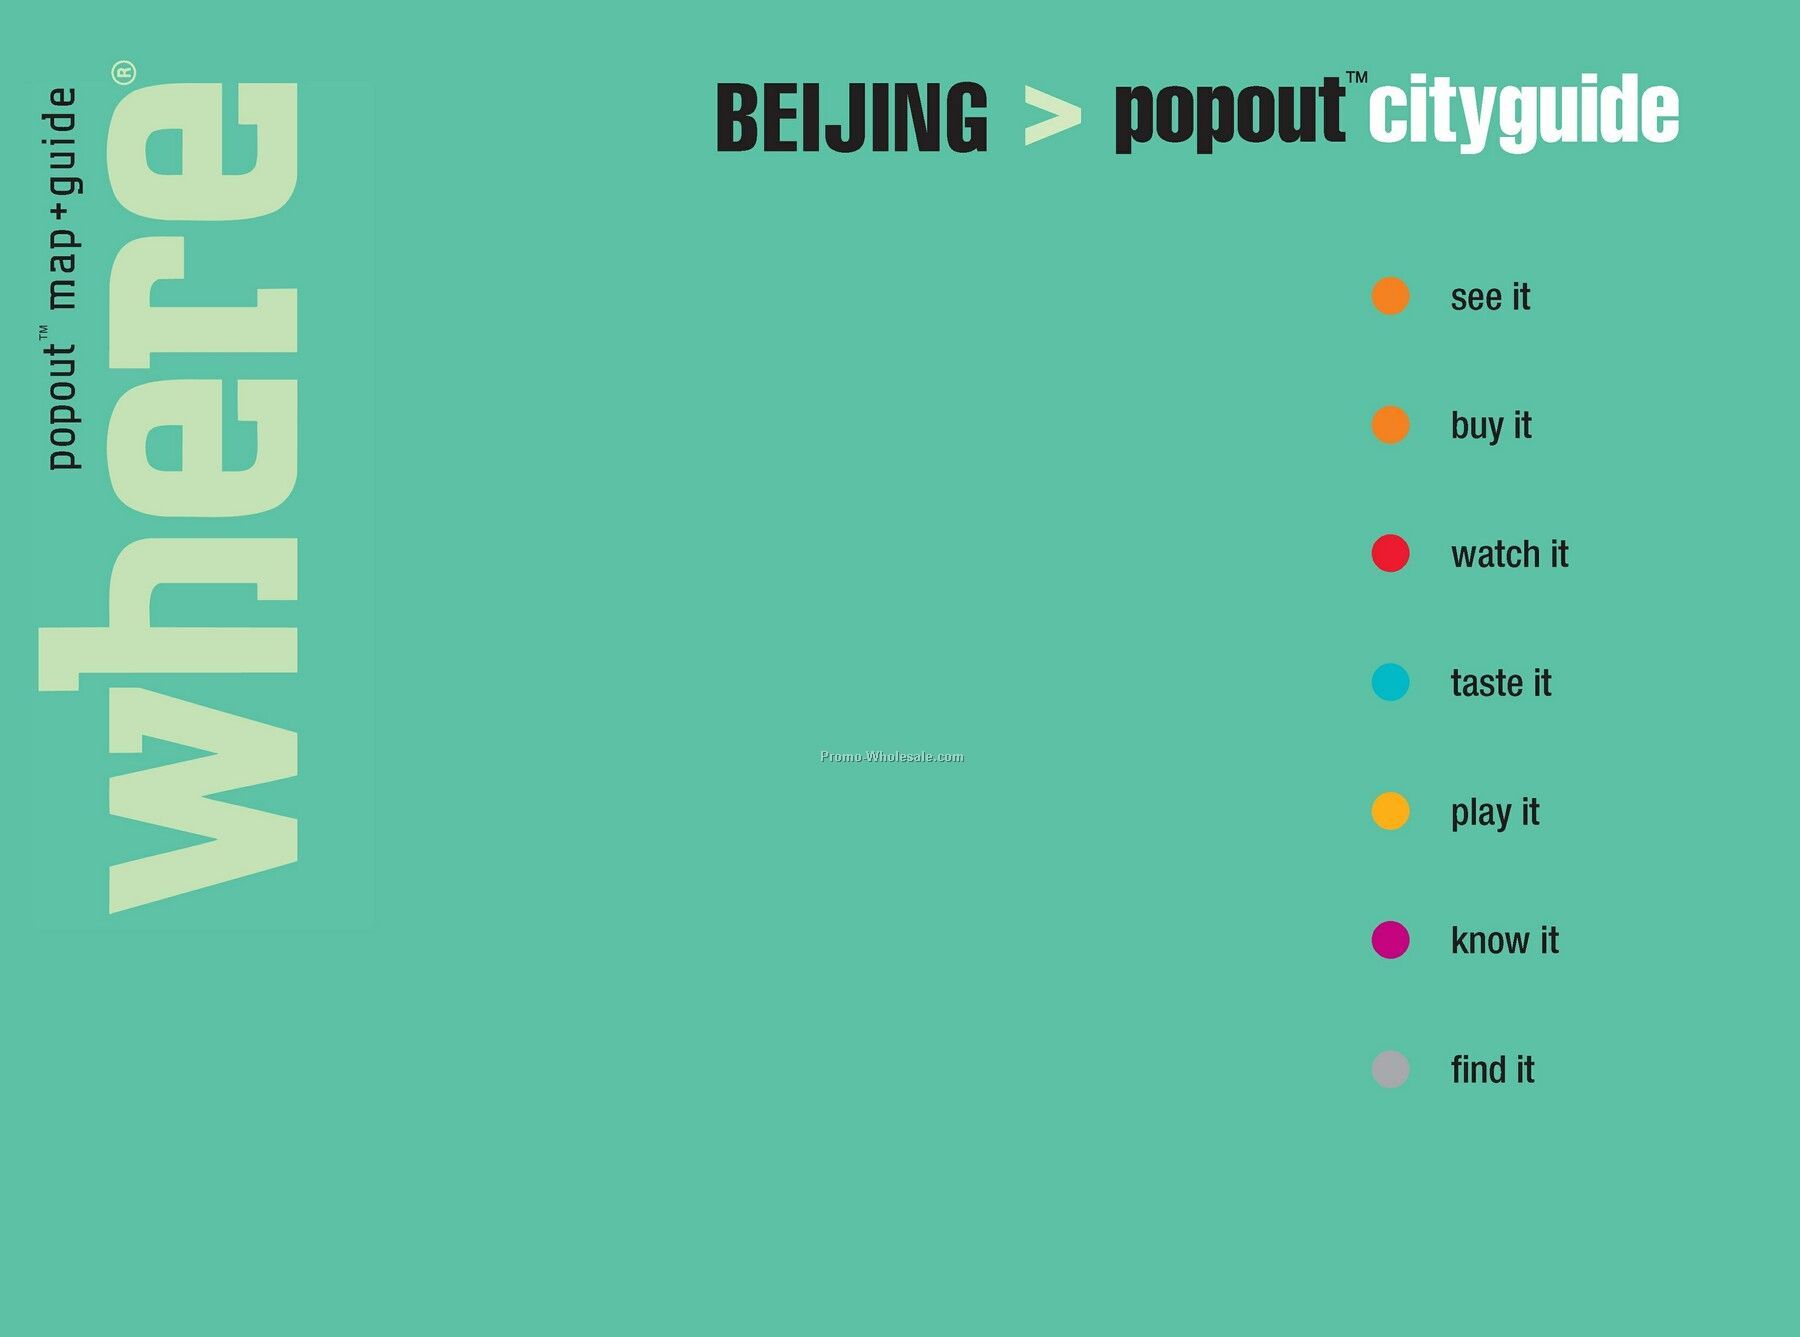 Travel Guides - International City Guide Of Beijing - Featuring Popout Maps